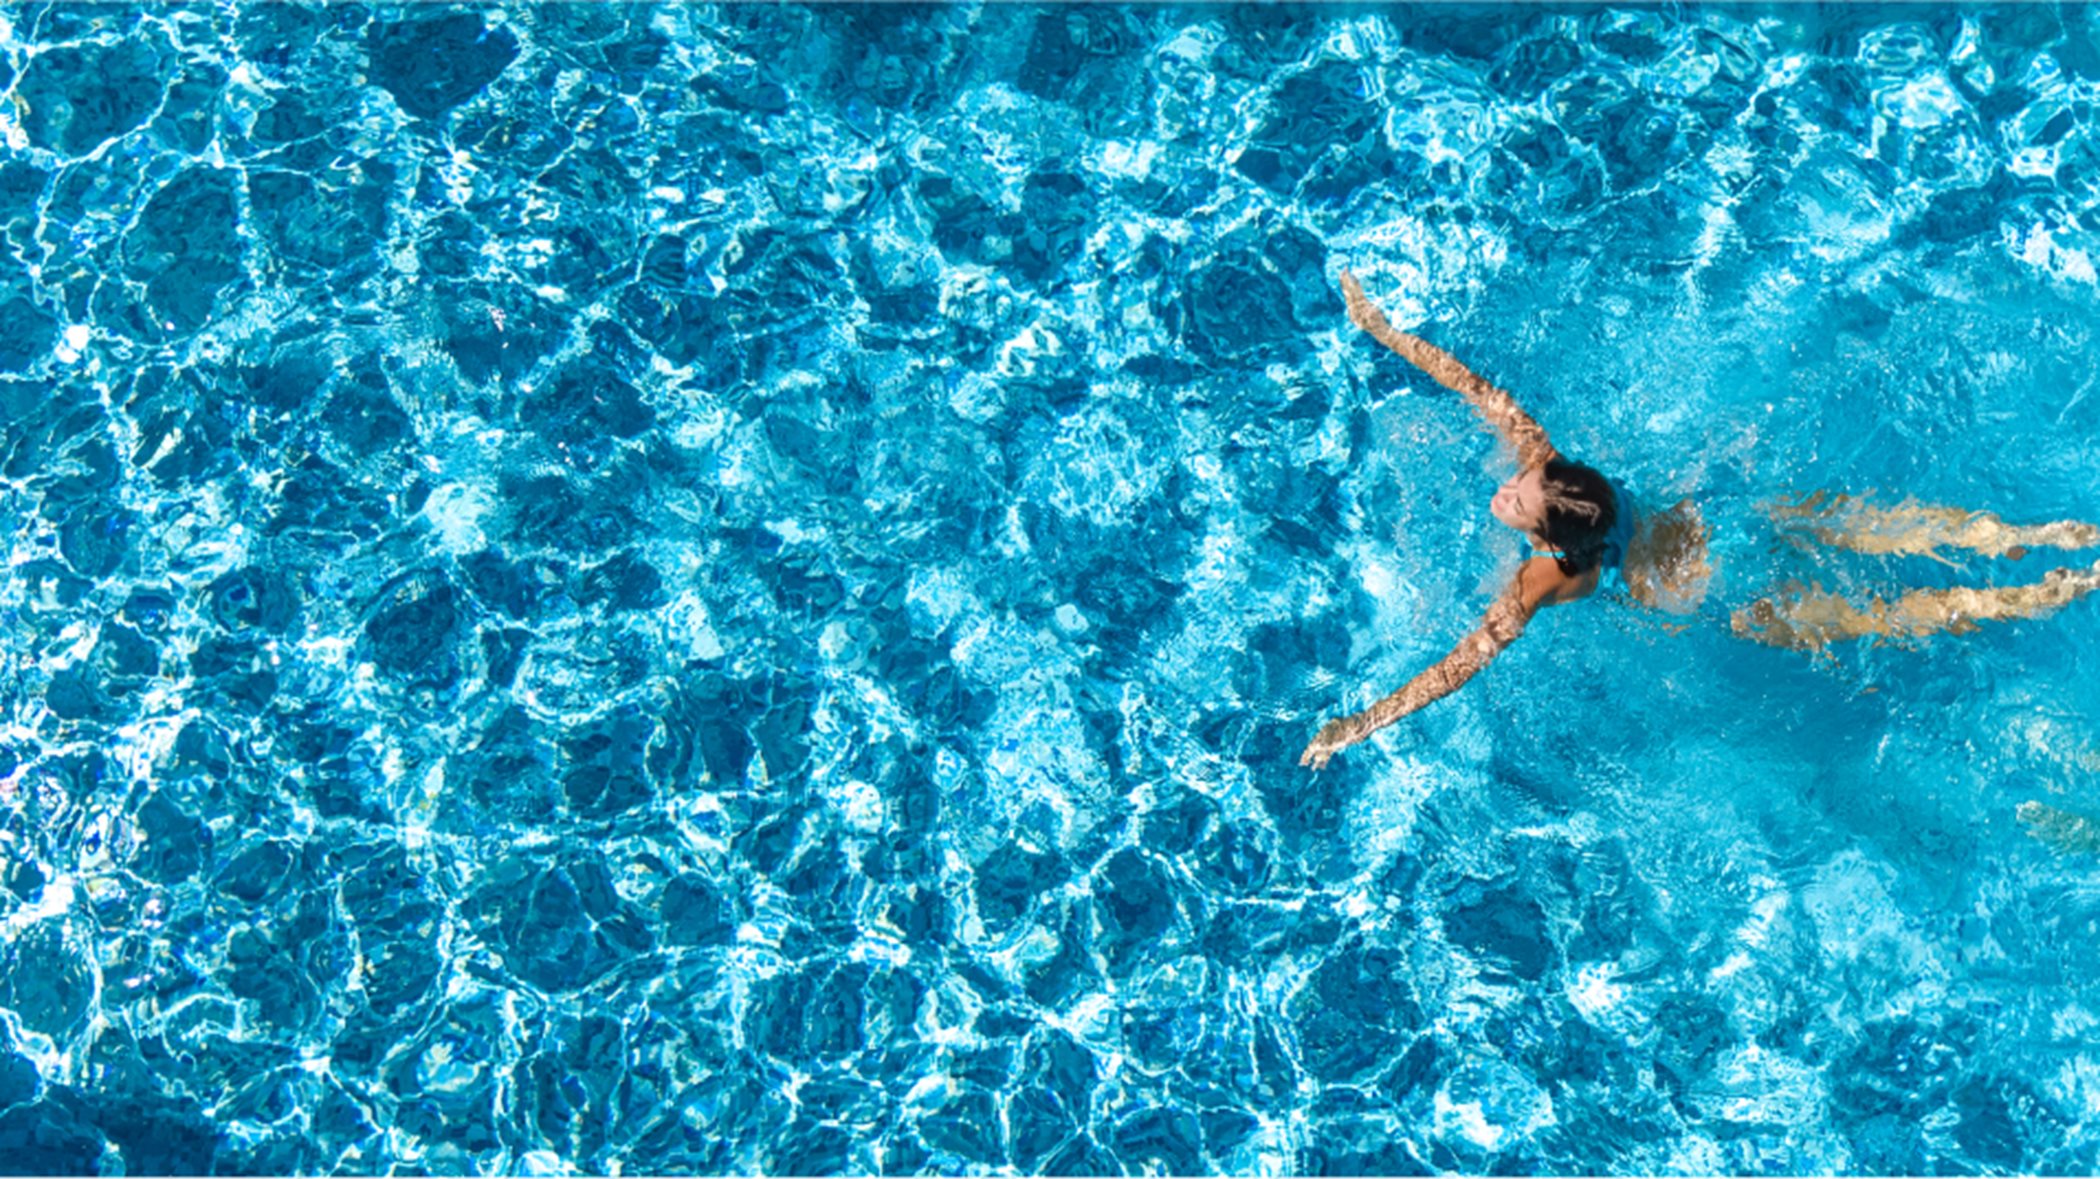 Aerial view of person swimming in a pool